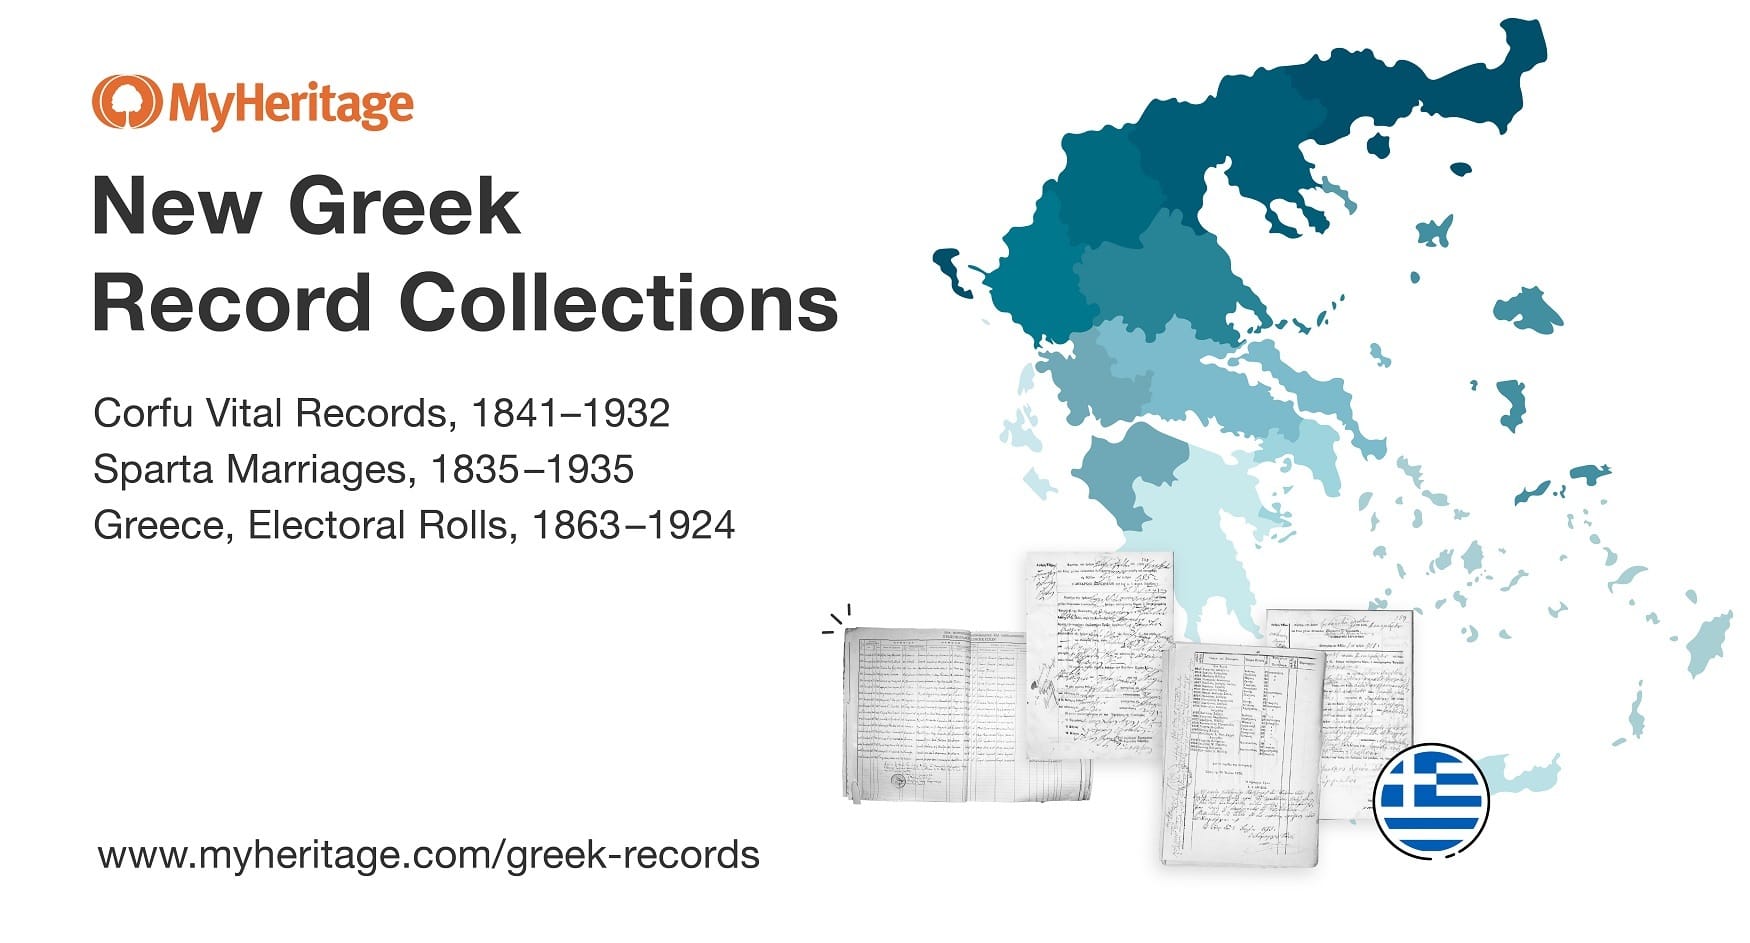 MyHeritage Adds Three Historical Record Collections From Greece